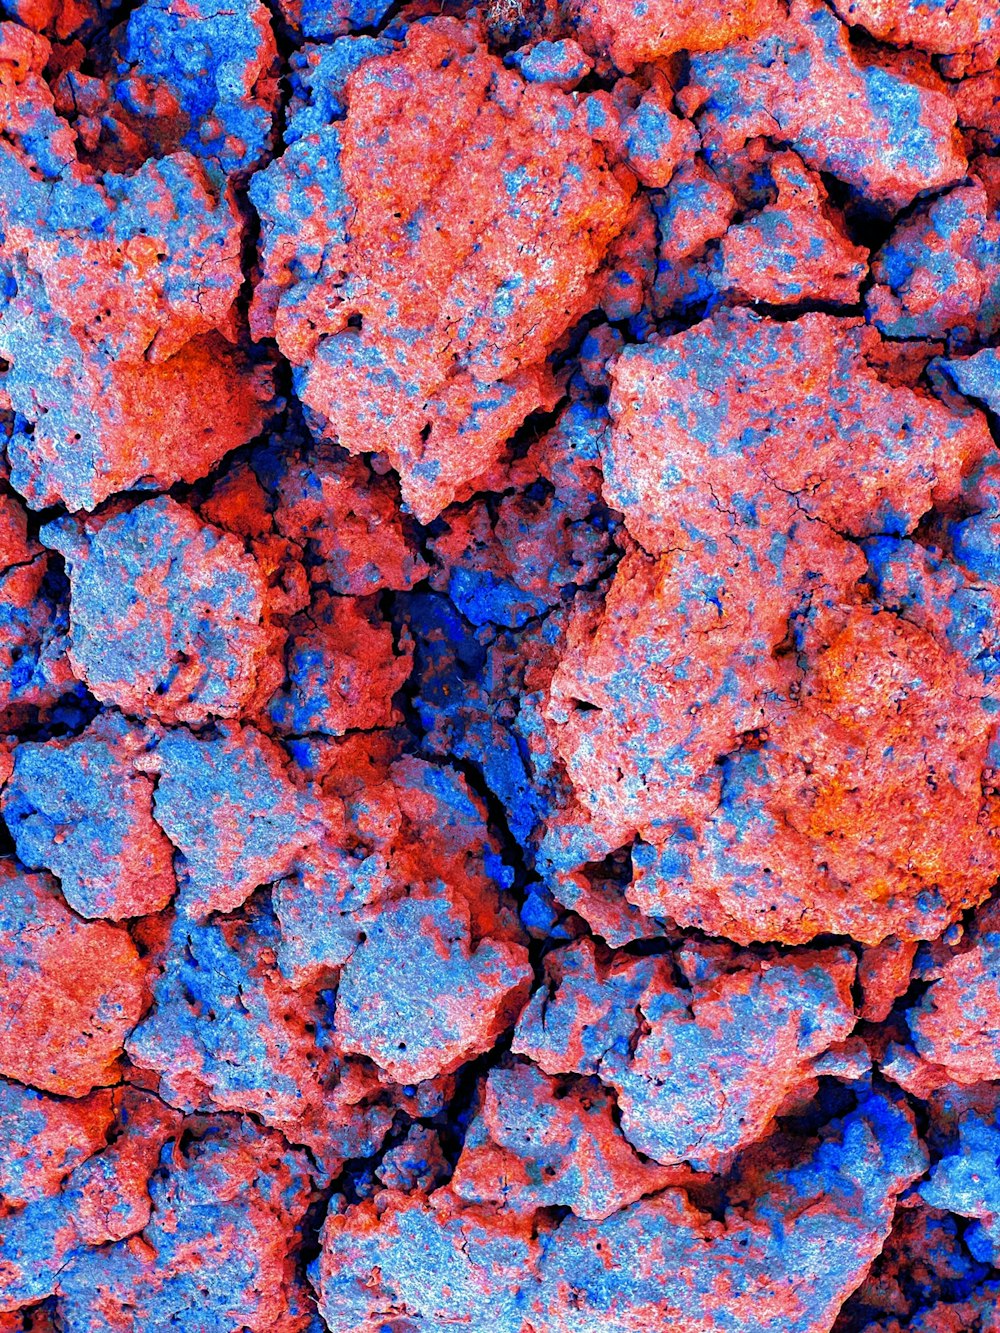 a close up of a rock surface with blue and red colors